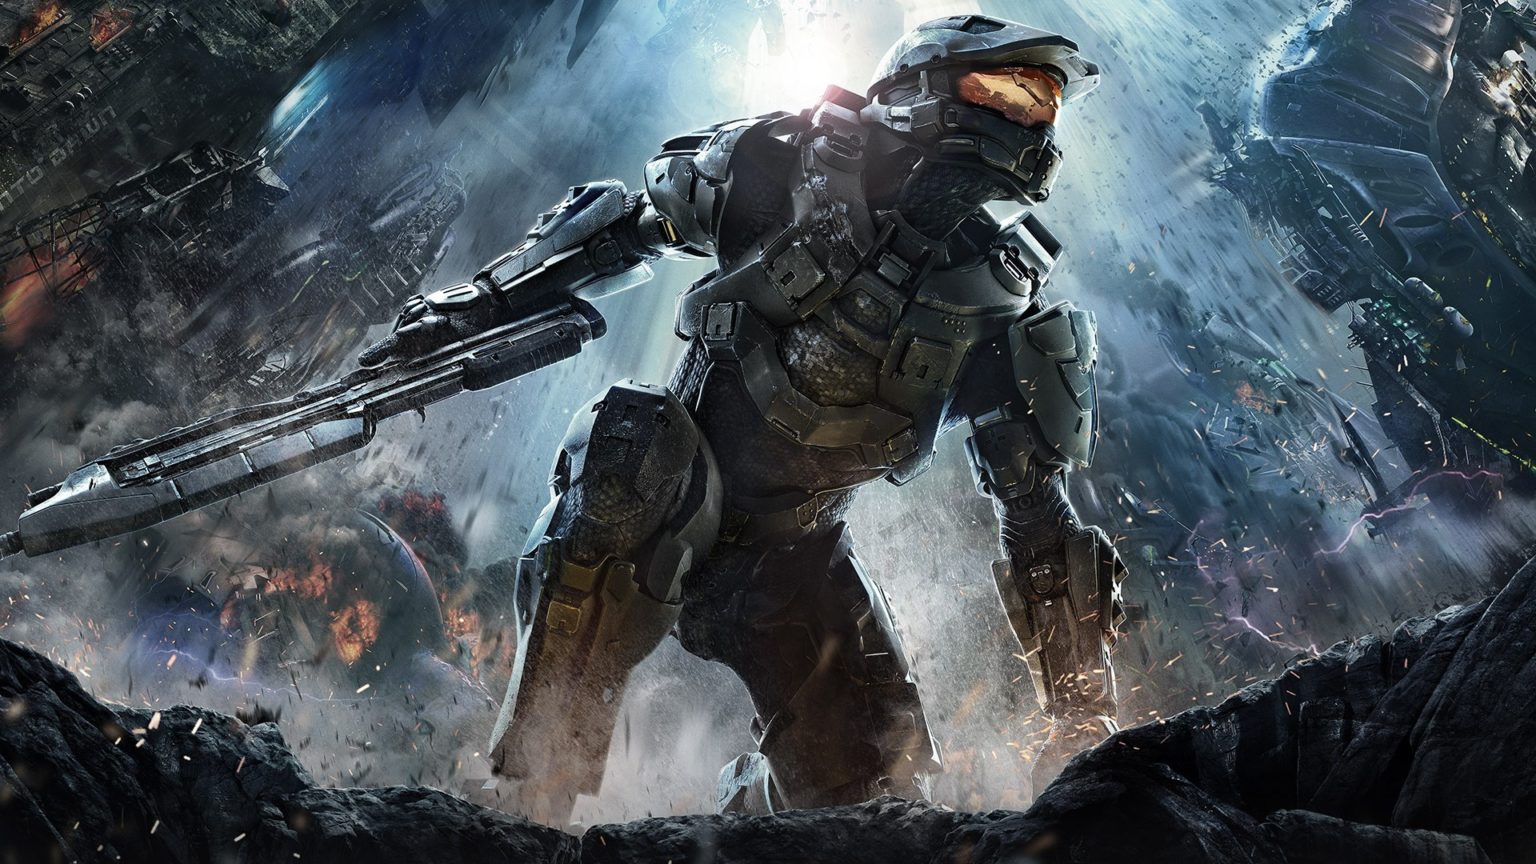 Season 8 will be the last season of Halo: The Master Chief Collection!